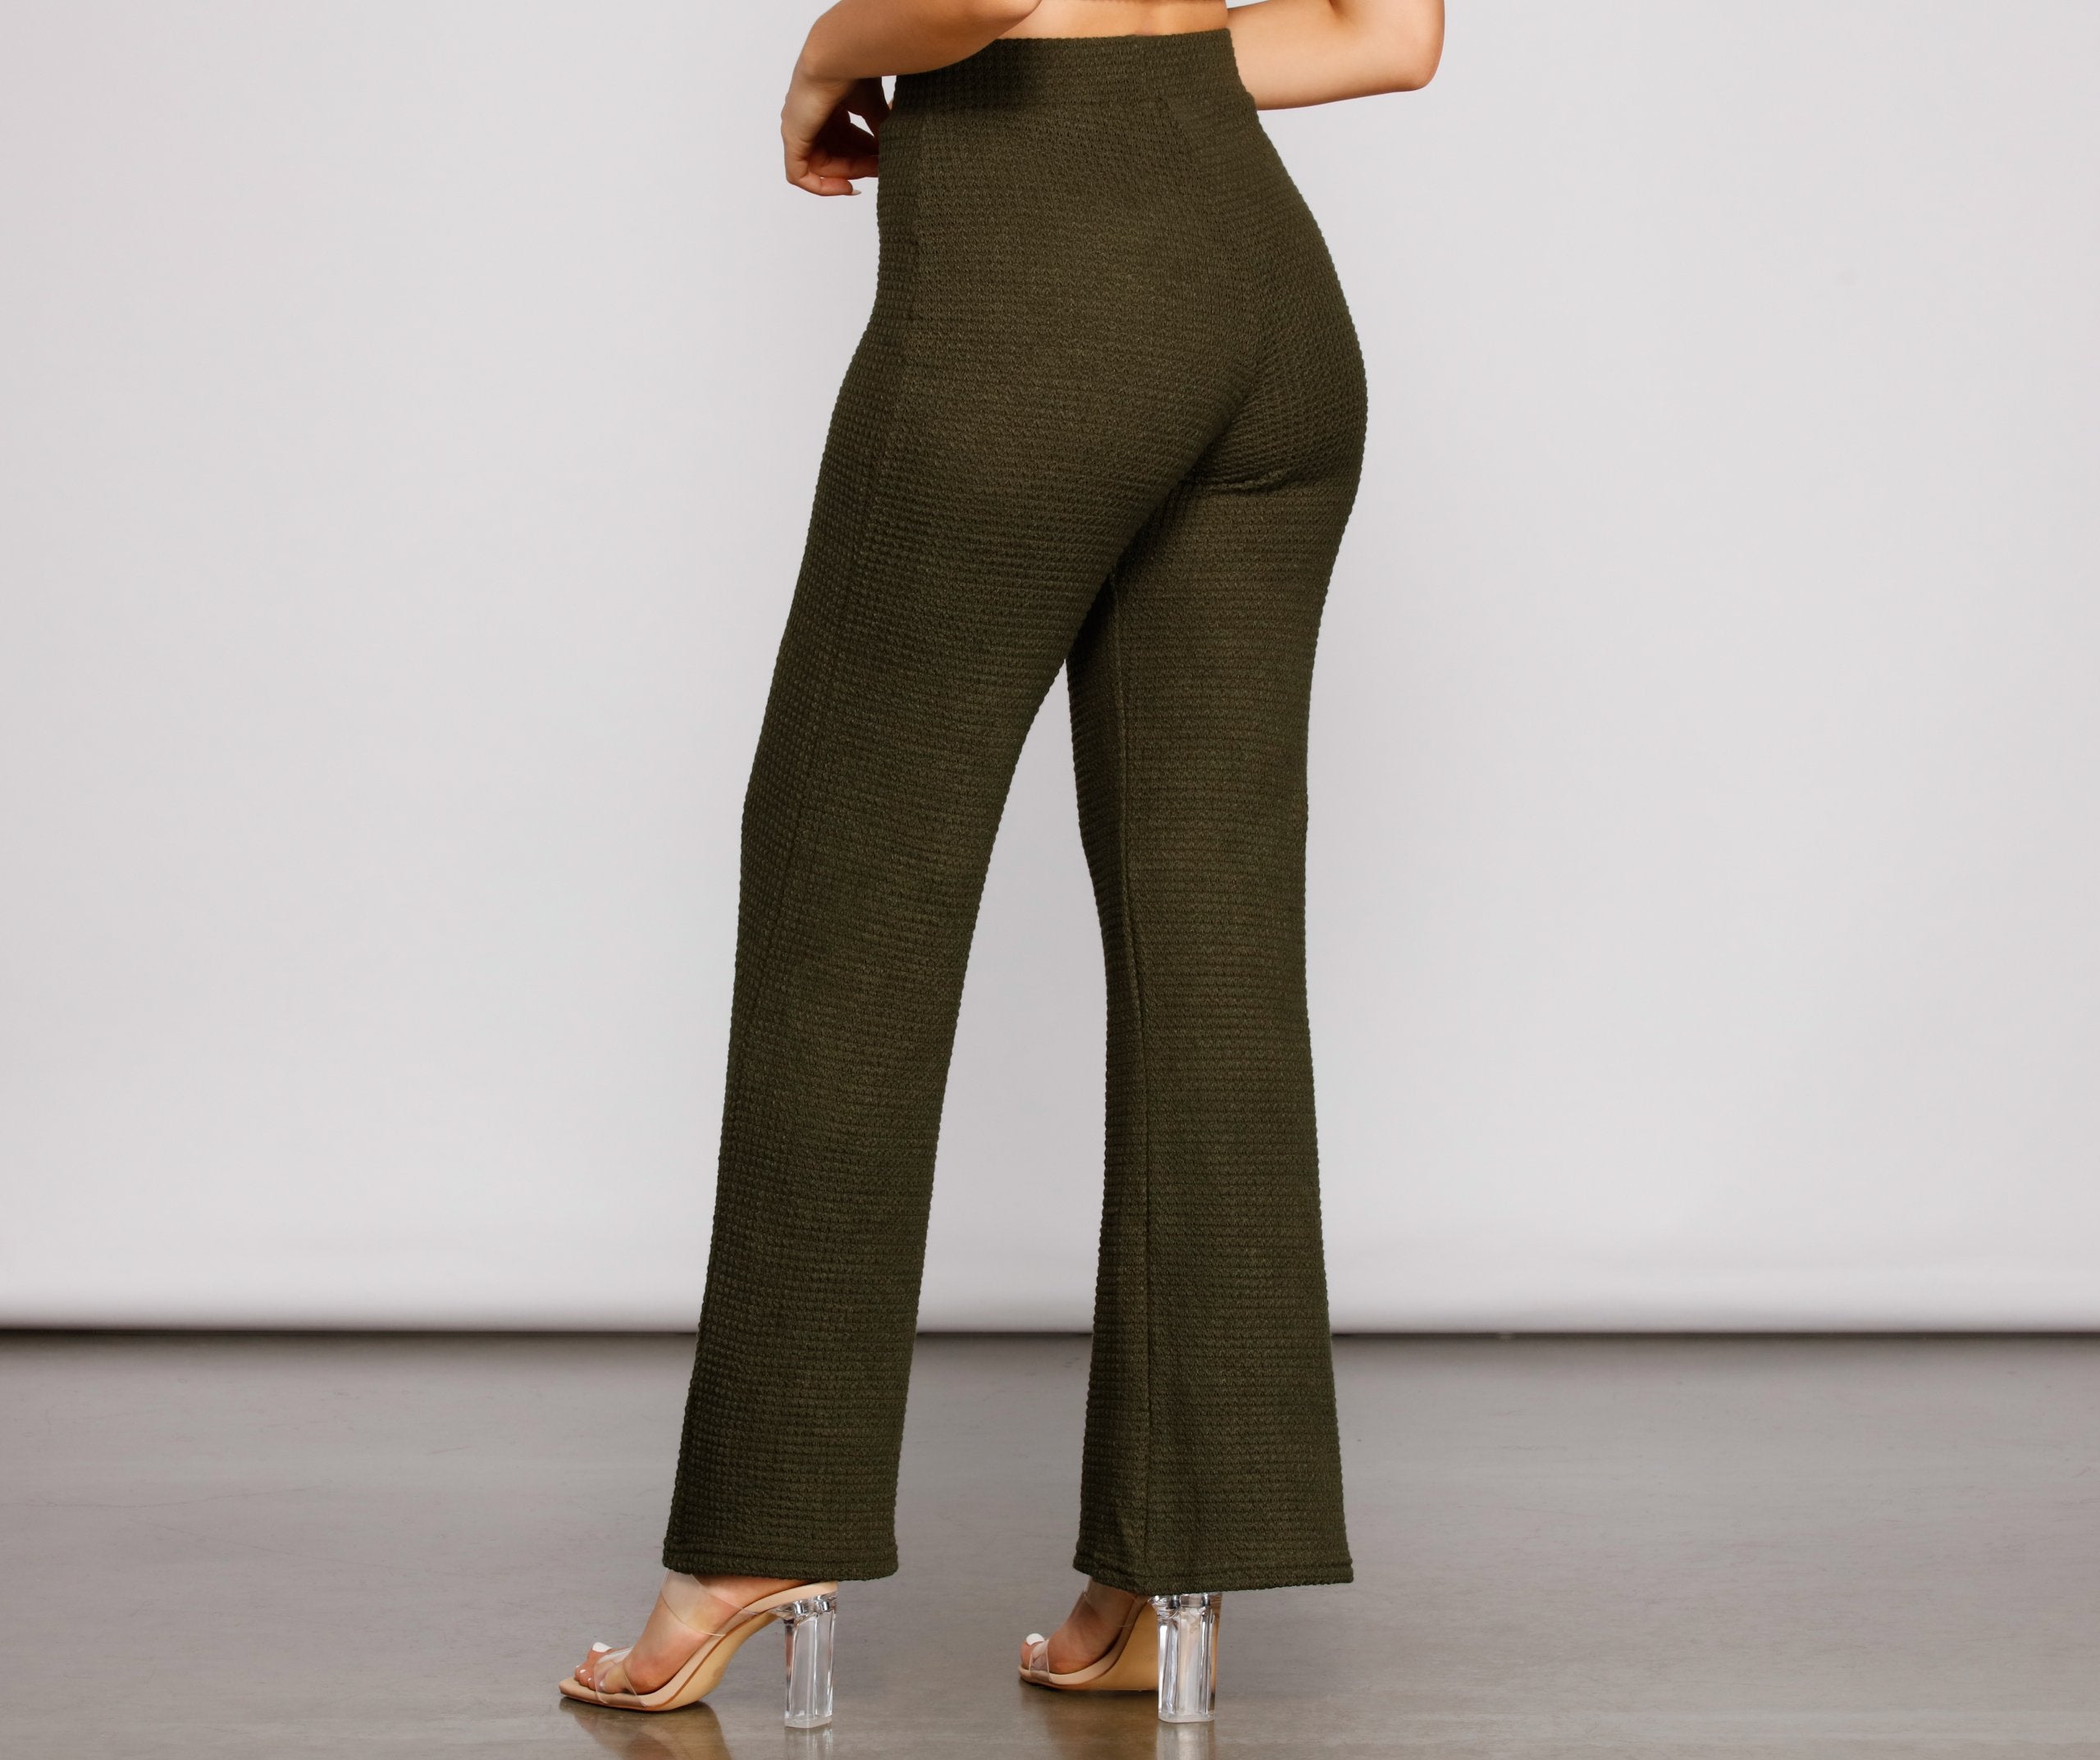 Trendy Textures High Waist Pants - Lady Occasions